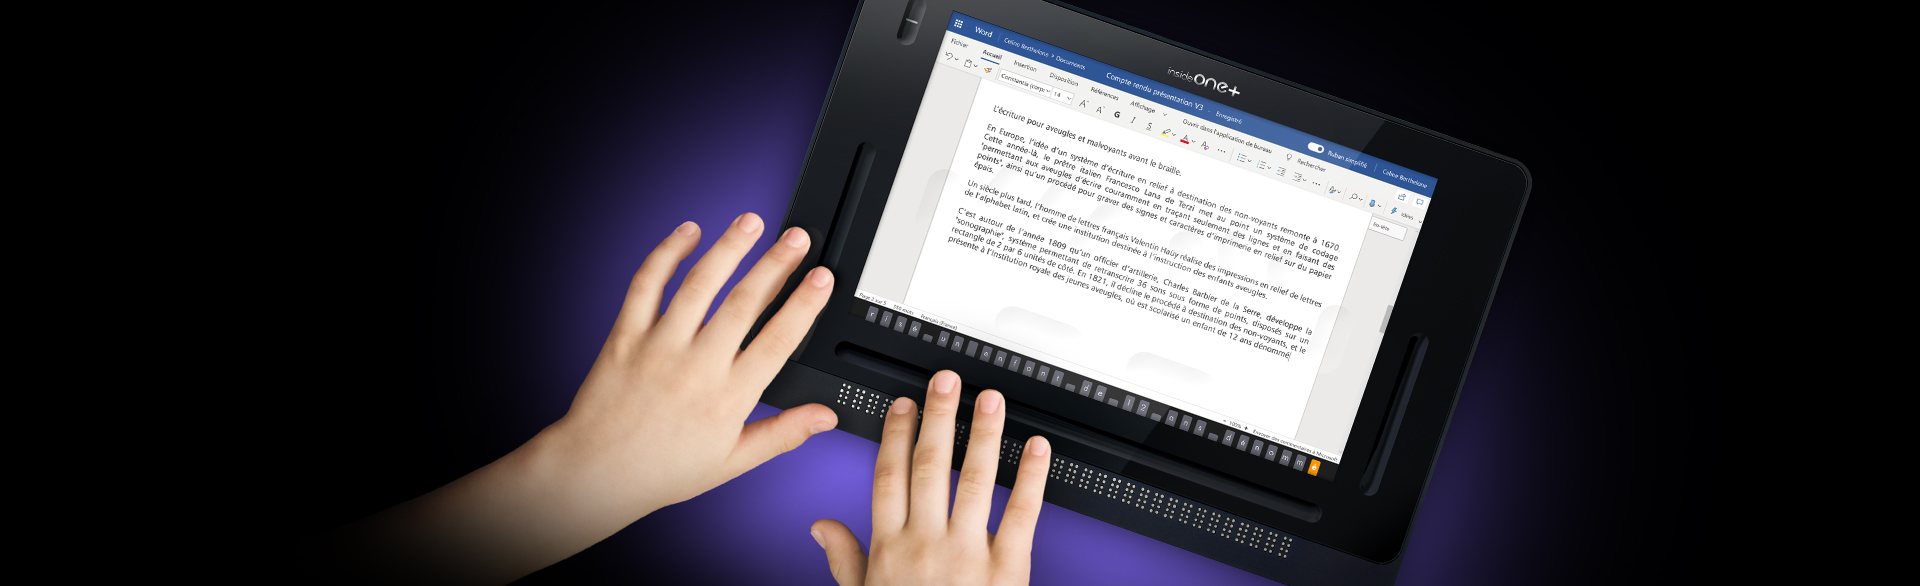 The image shows a child's hands resting on the insideONE+ tablet.